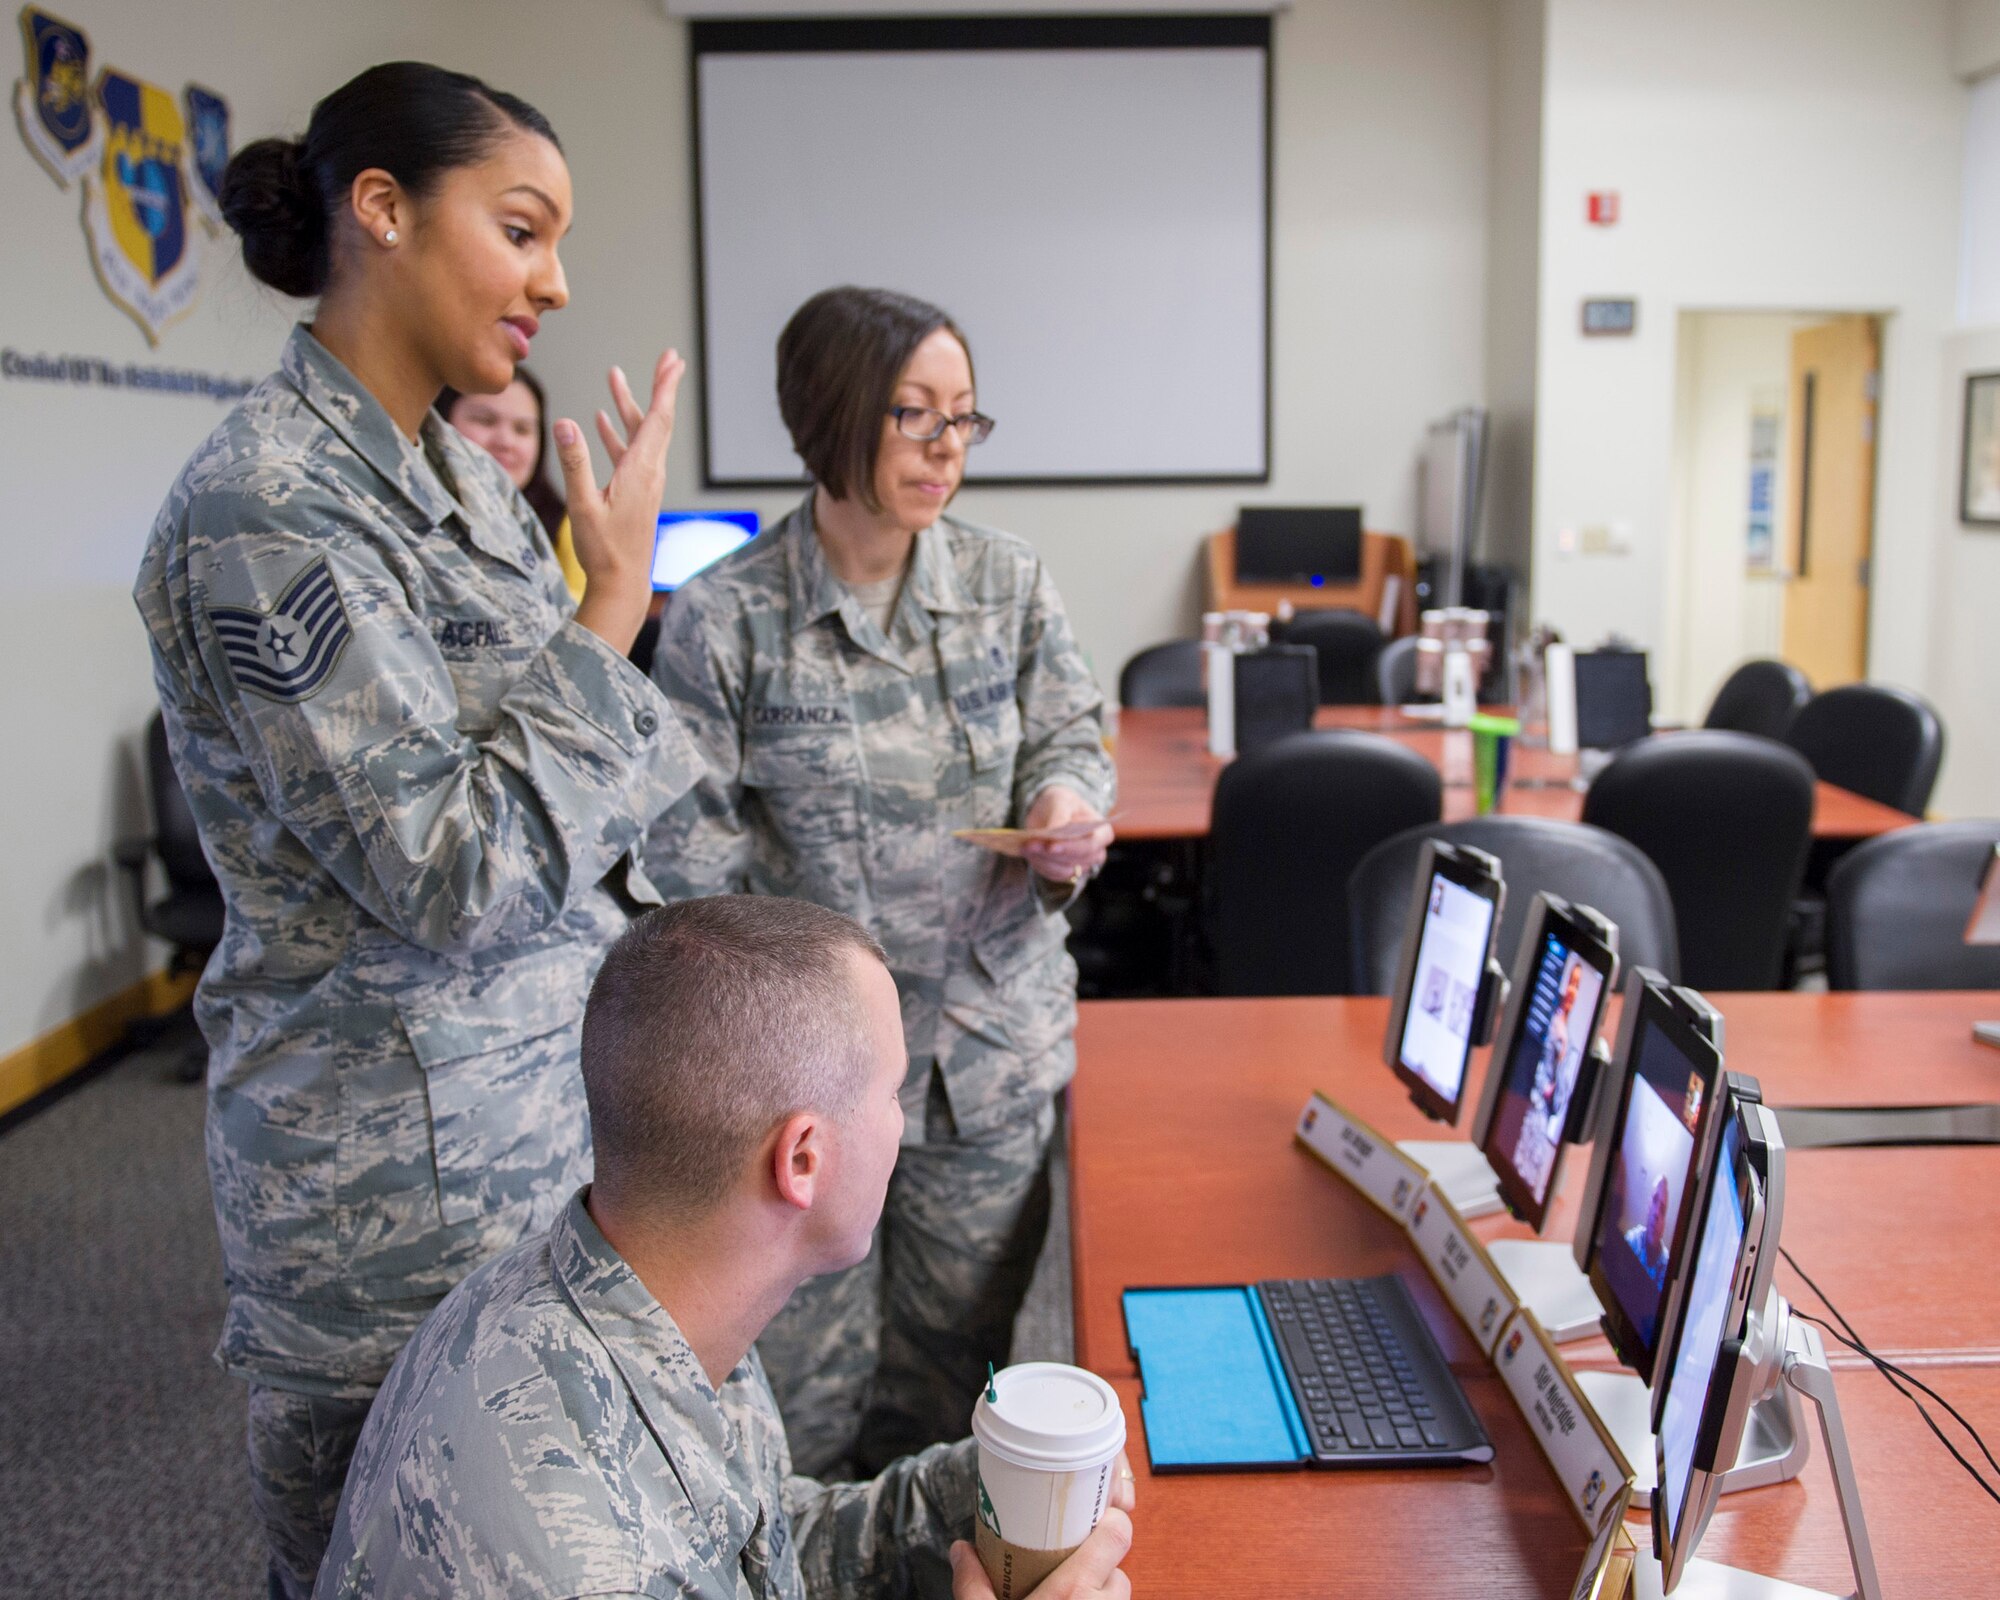 Tech. Sgt. Tamara Acfalle, 45th Force Support Squadron Airman Leadership School instructor, left, speaks with the students of the first virtual classroom, at the PAFB Professional Development Center. Master Sgt. Monica Carranza, 45th Medical Group Public Health professional, back, and Tech. Sgt. Brent Kenney, also a PAFB ALS instructor, front, observe and check for issues. (U.S. Air Force photo/Matthew Jurgens) (Released)